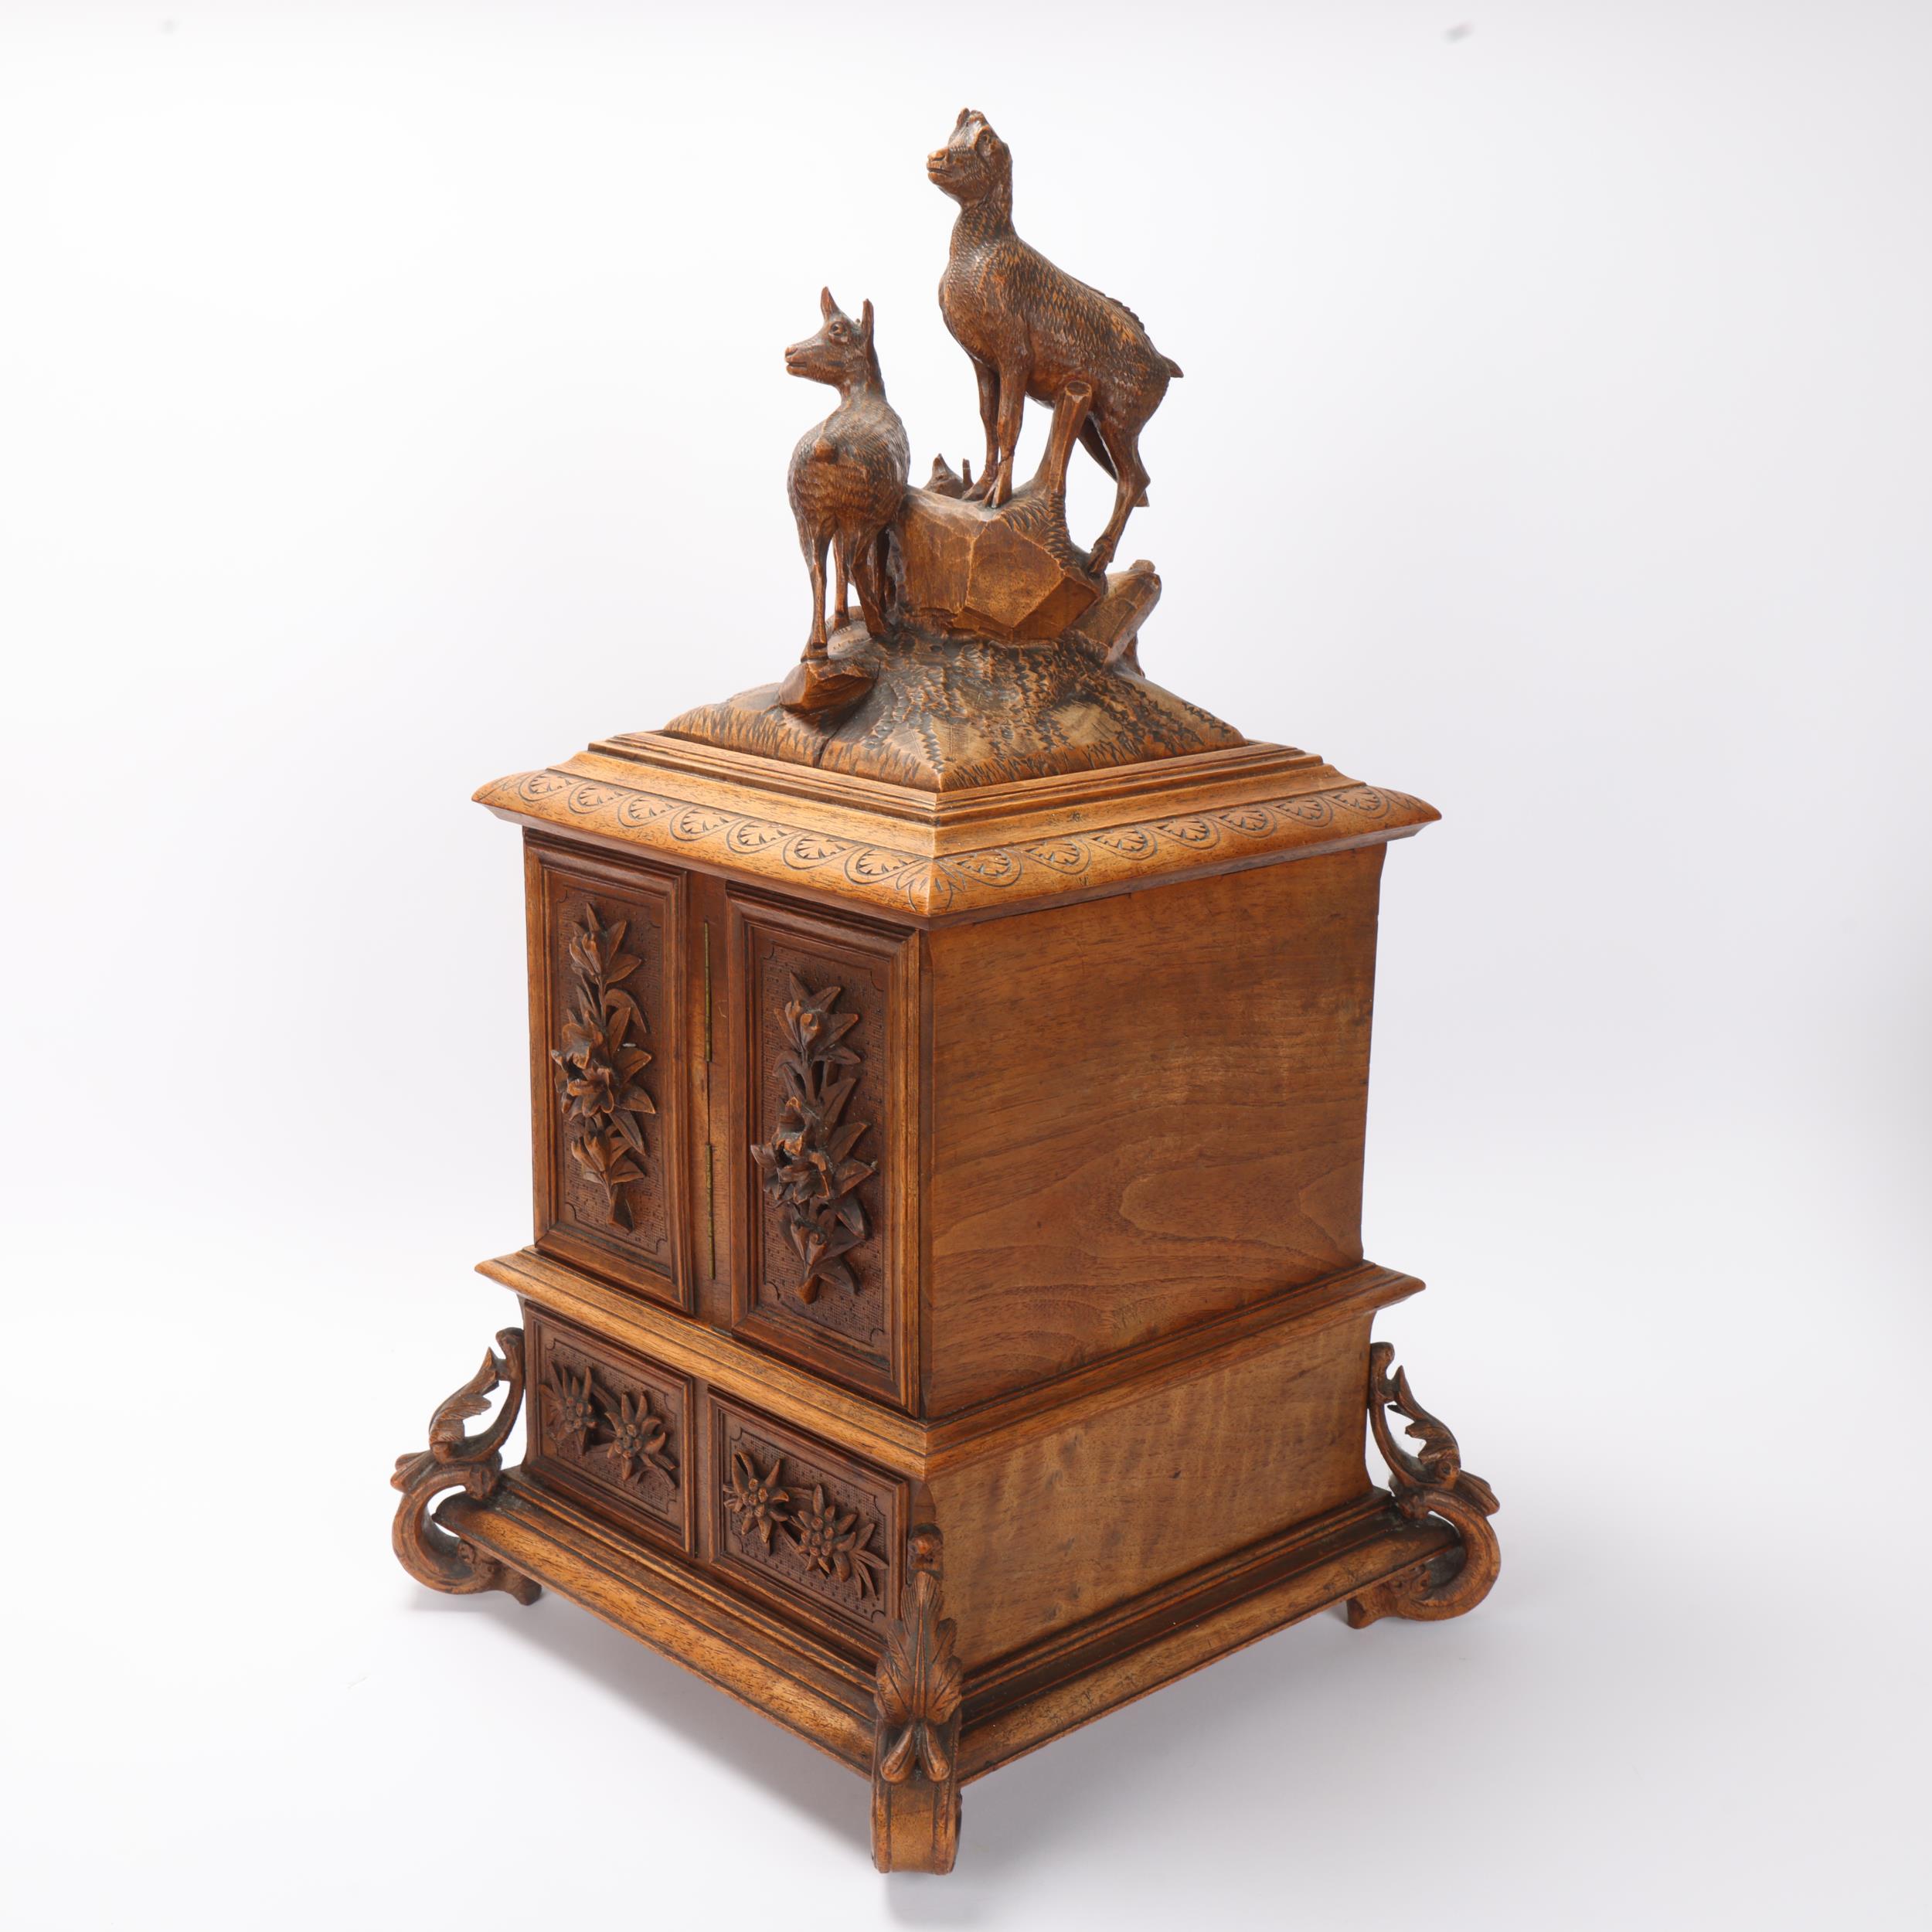 An ornate 19th century Black Forest table cabinet, the lid surmounted a carved wood group of deer, 2 - Image 3 of 3